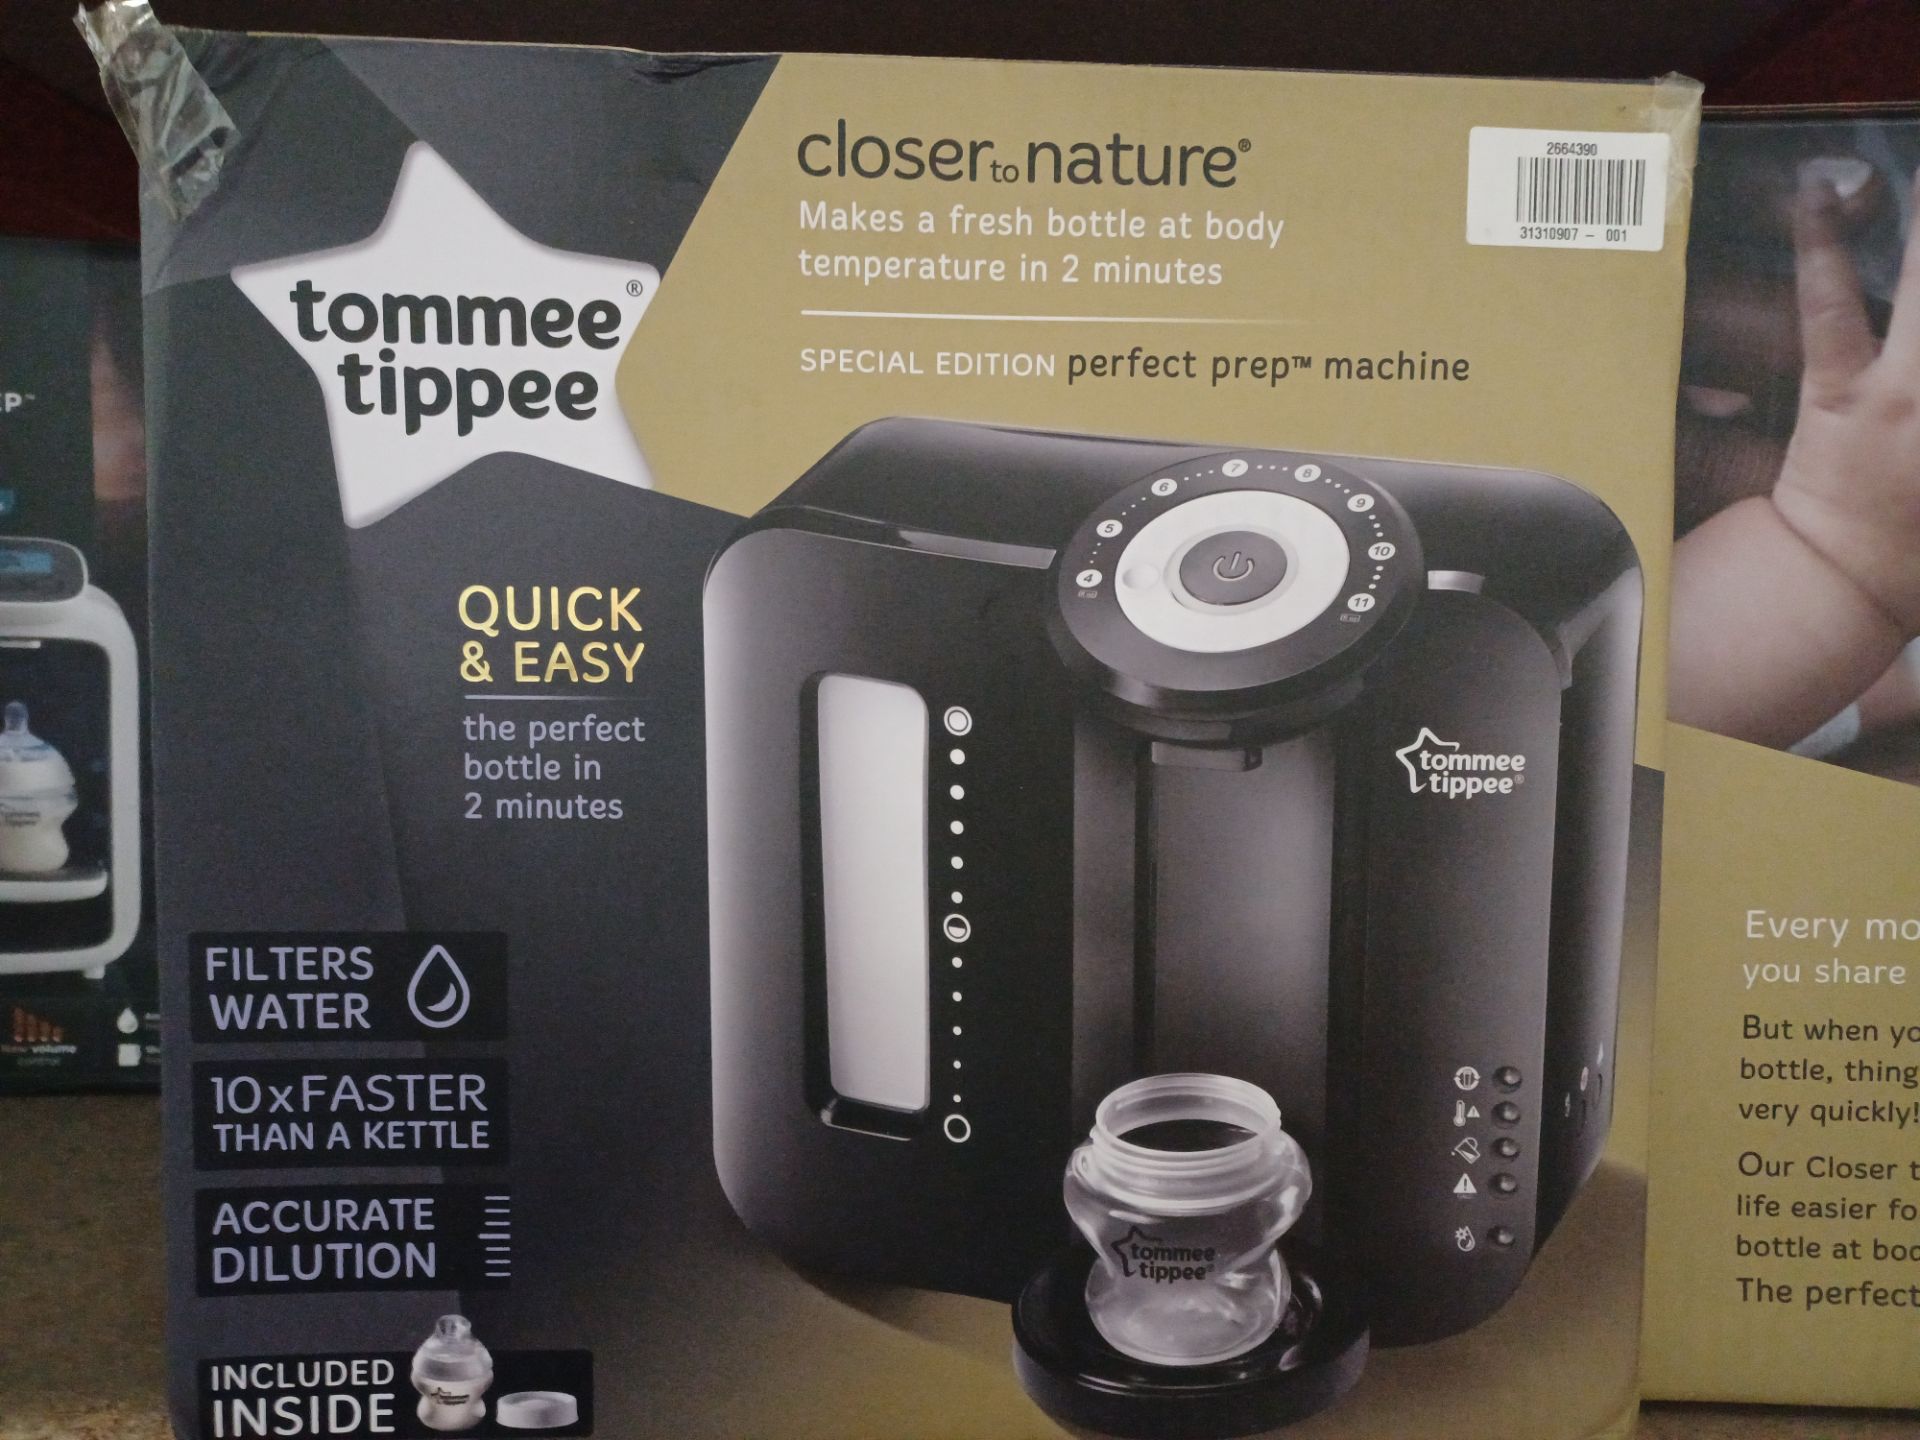 Tommee Tippee Special Edition Perfect Prep Machine - PCK